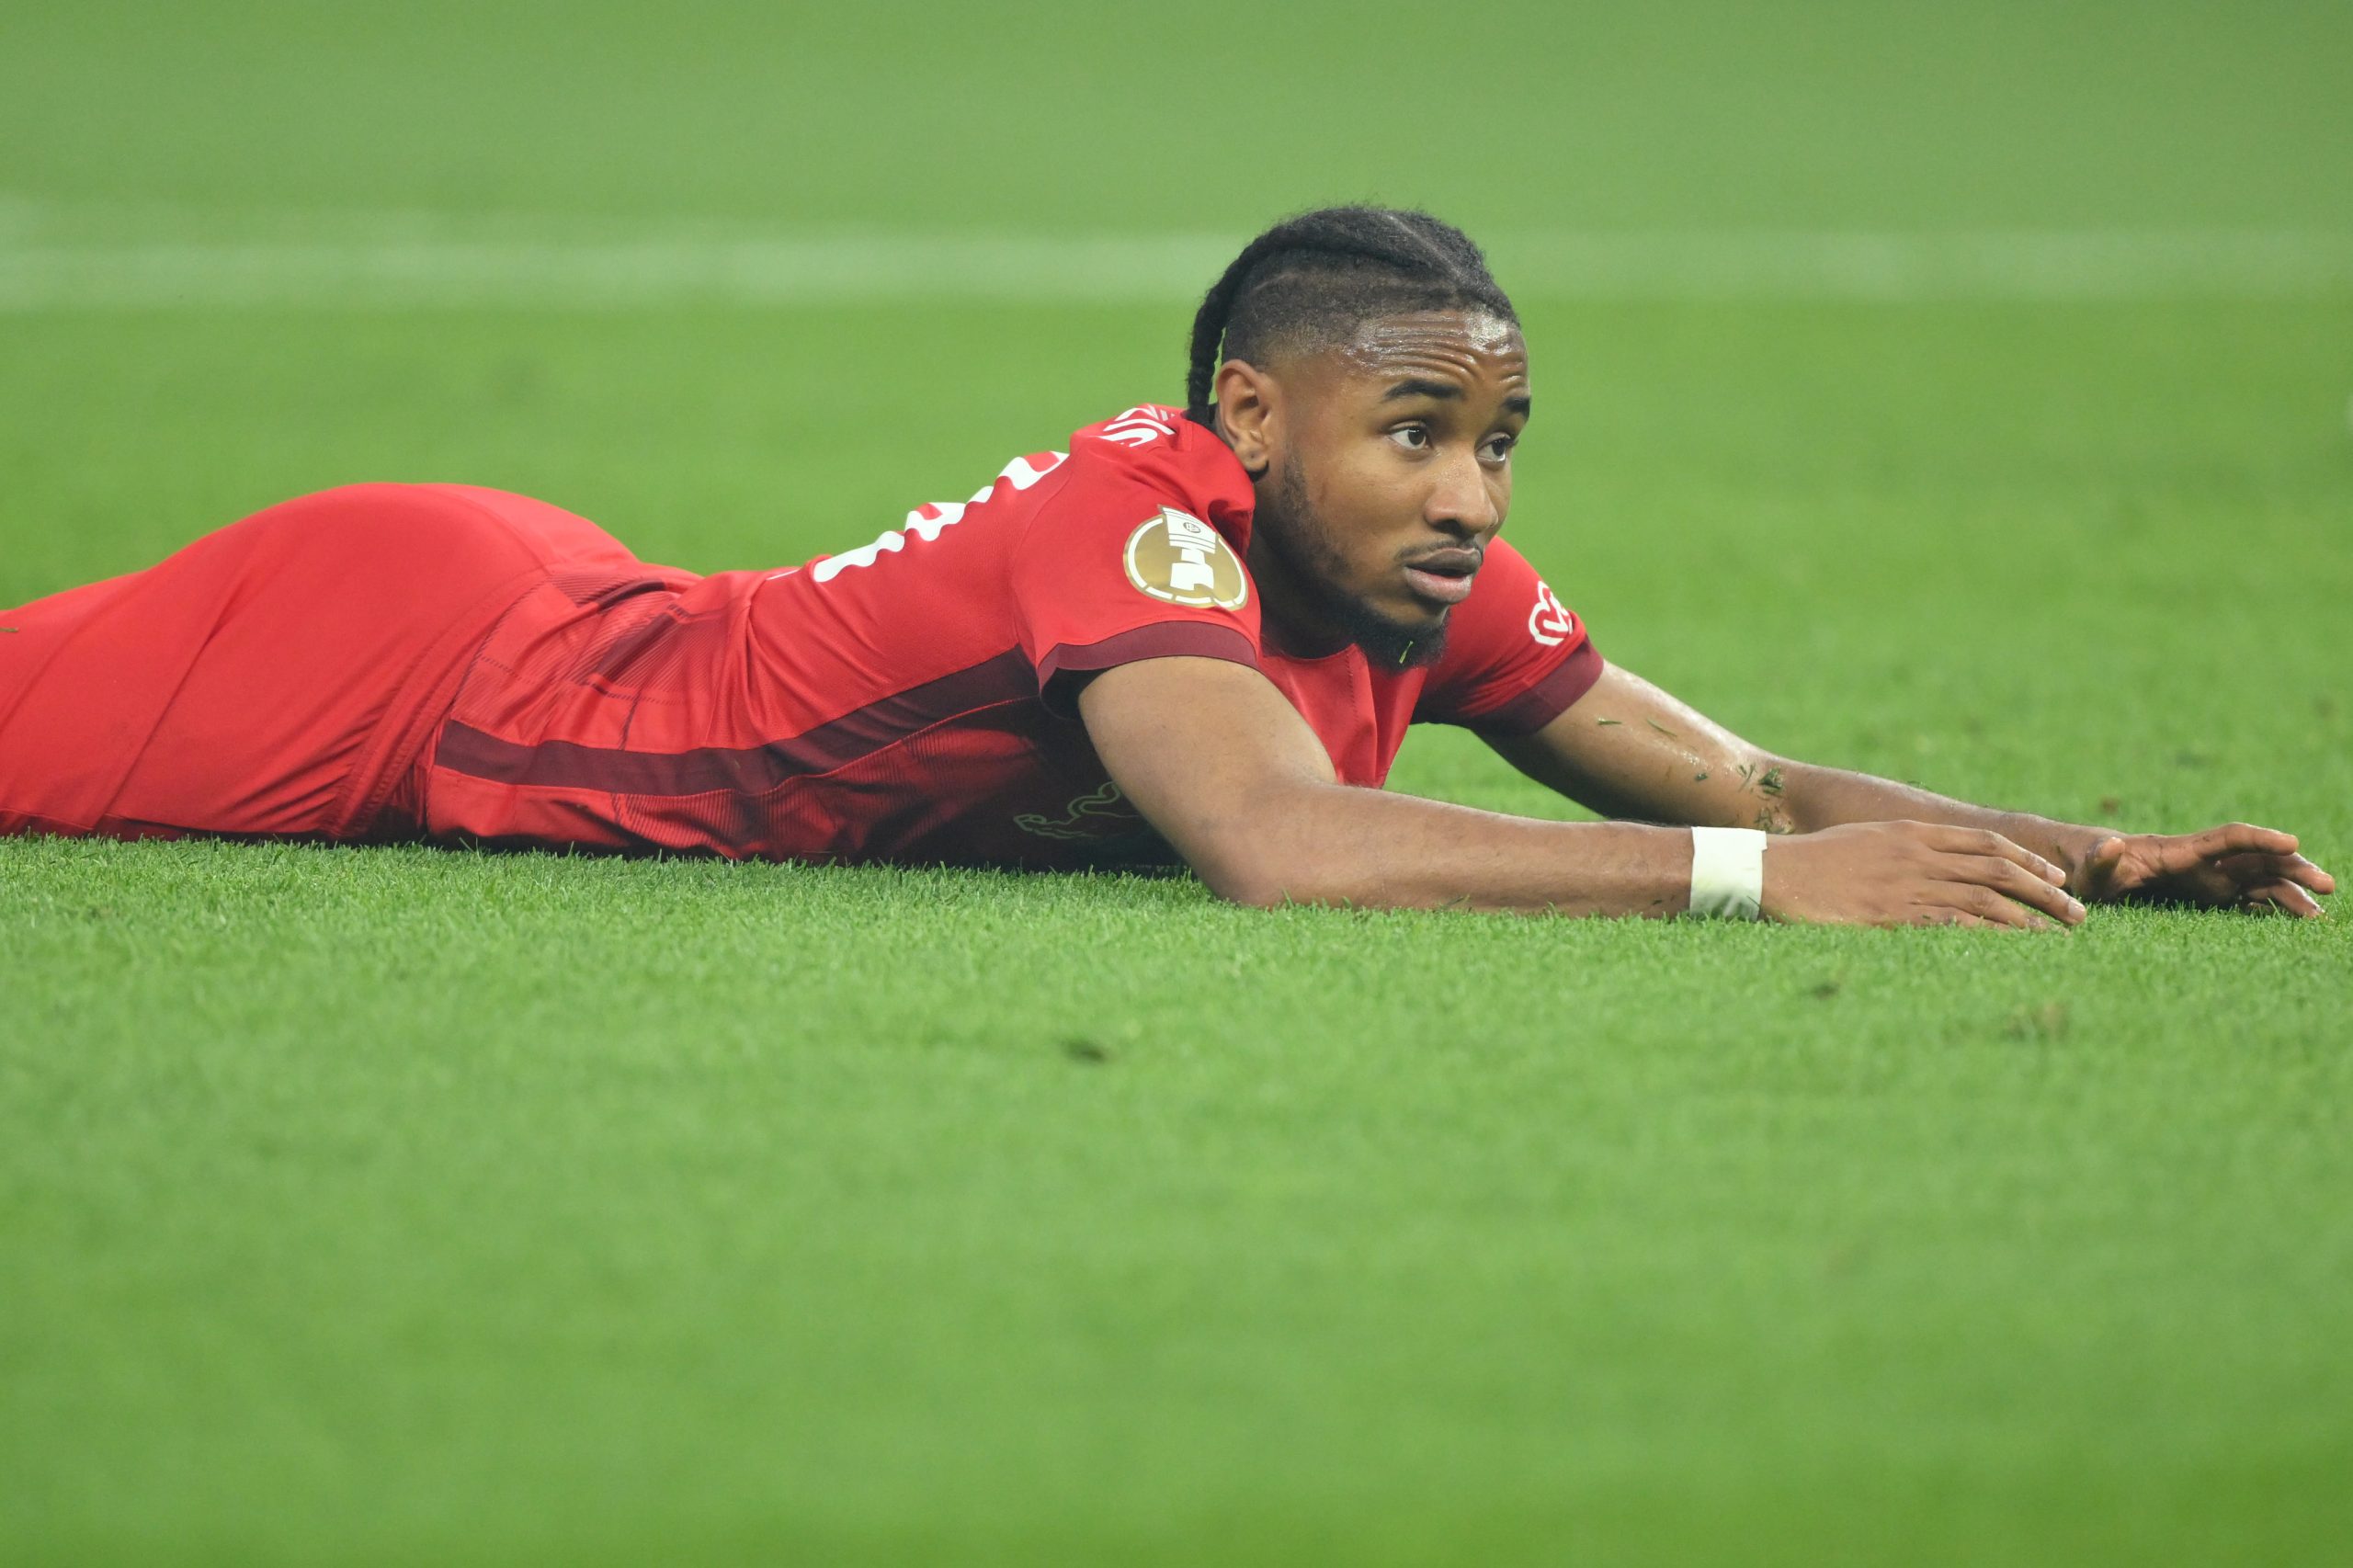 Christopher Nkunku of RB Leipzig lies on the pitch during the DFB Cup final match against Eintracht Frankfurt at Olympiastadion.